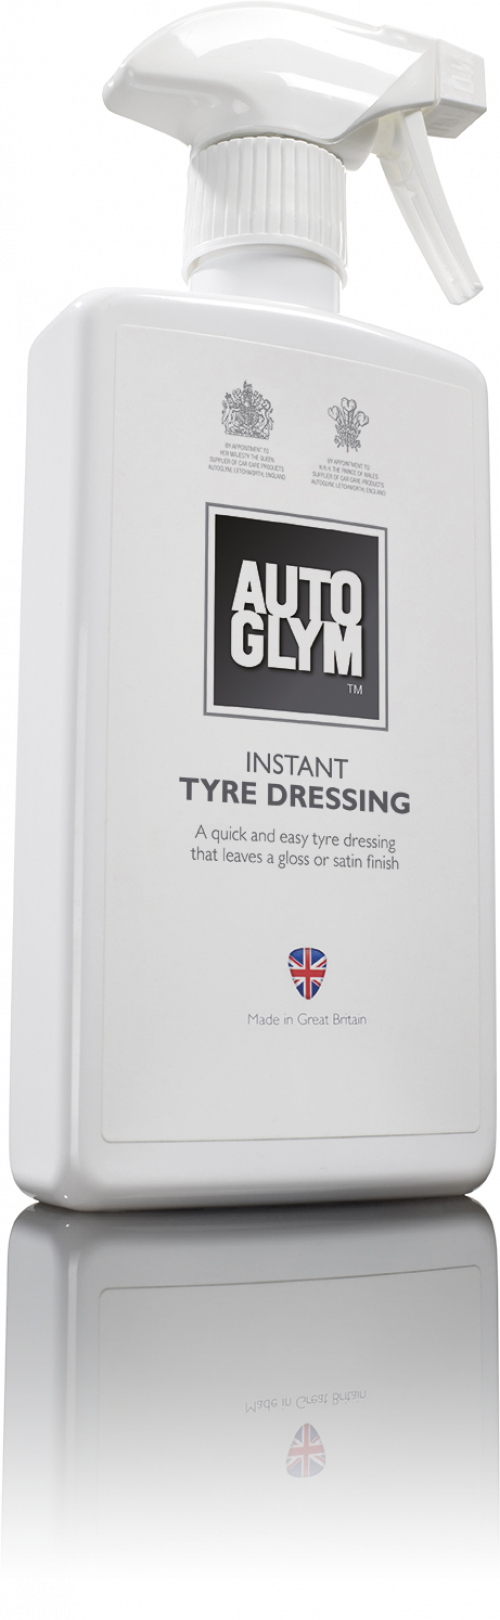 Instant Tyre Dressing